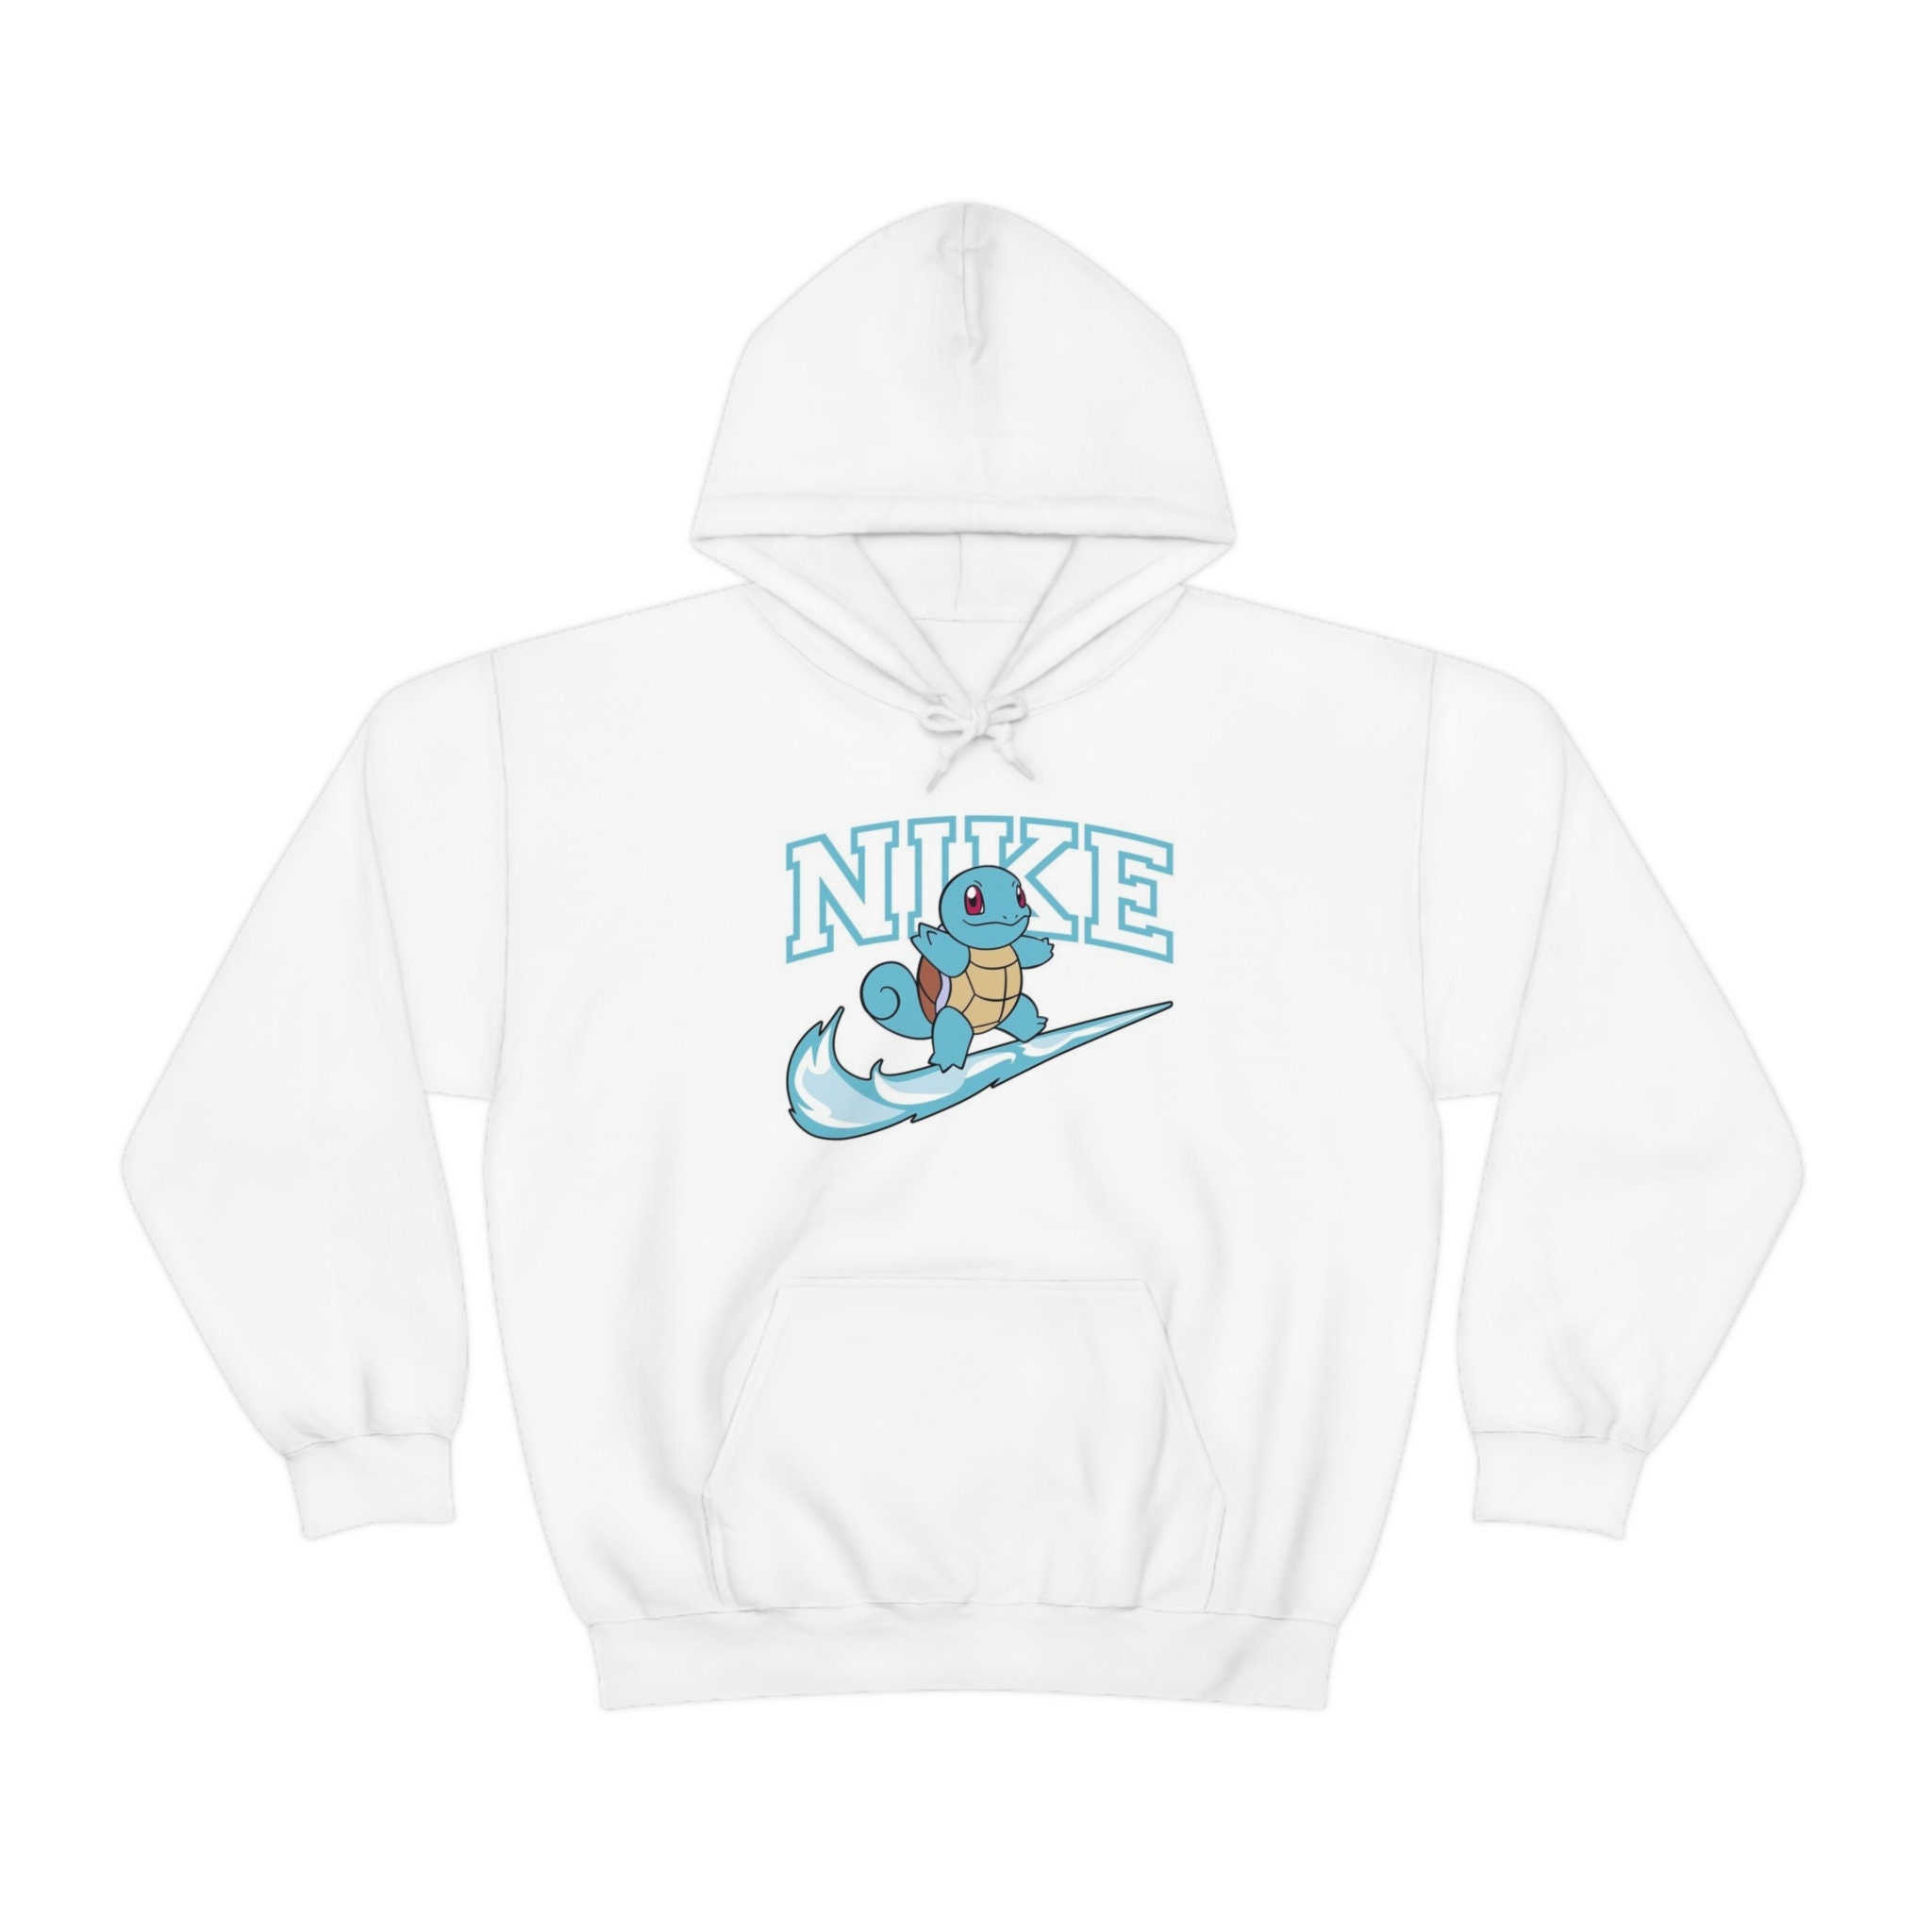 Nike Squirtle Pokemon Embroidered Sweatshirt, Pokemon Embroidered Shirt,  Nike Inspired Embroidered Hoodie - Small Gifts Great Love